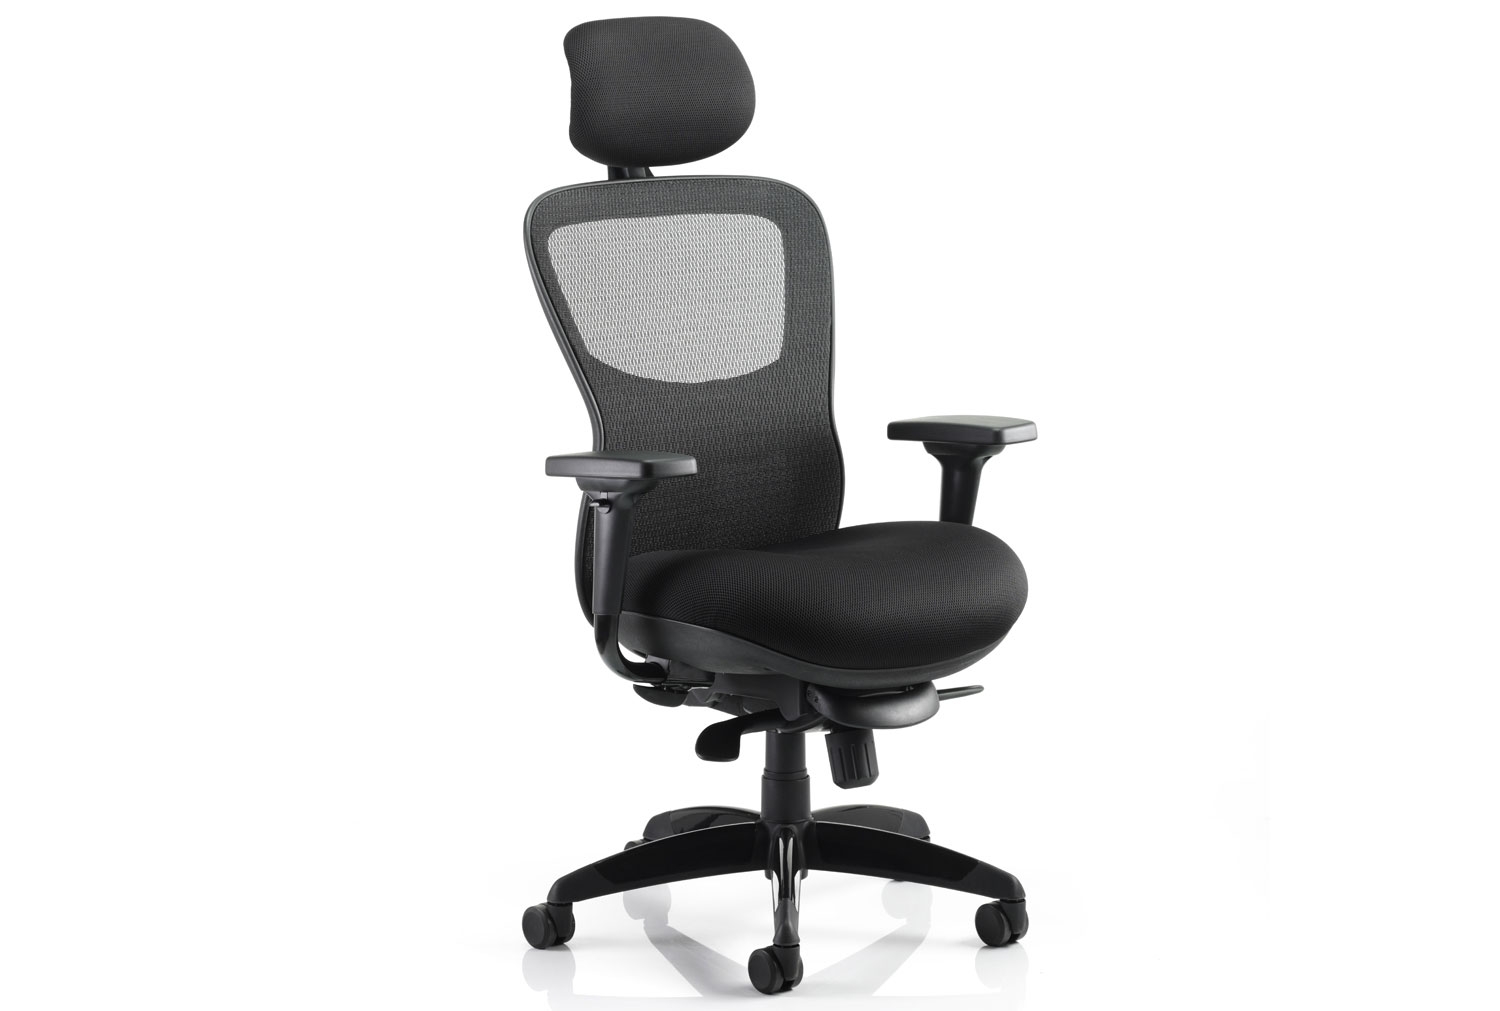 Shadow Ergonomic Mesh Back Posture Office Chair With Black Airmesh Seat And Headrest, Fully Installed